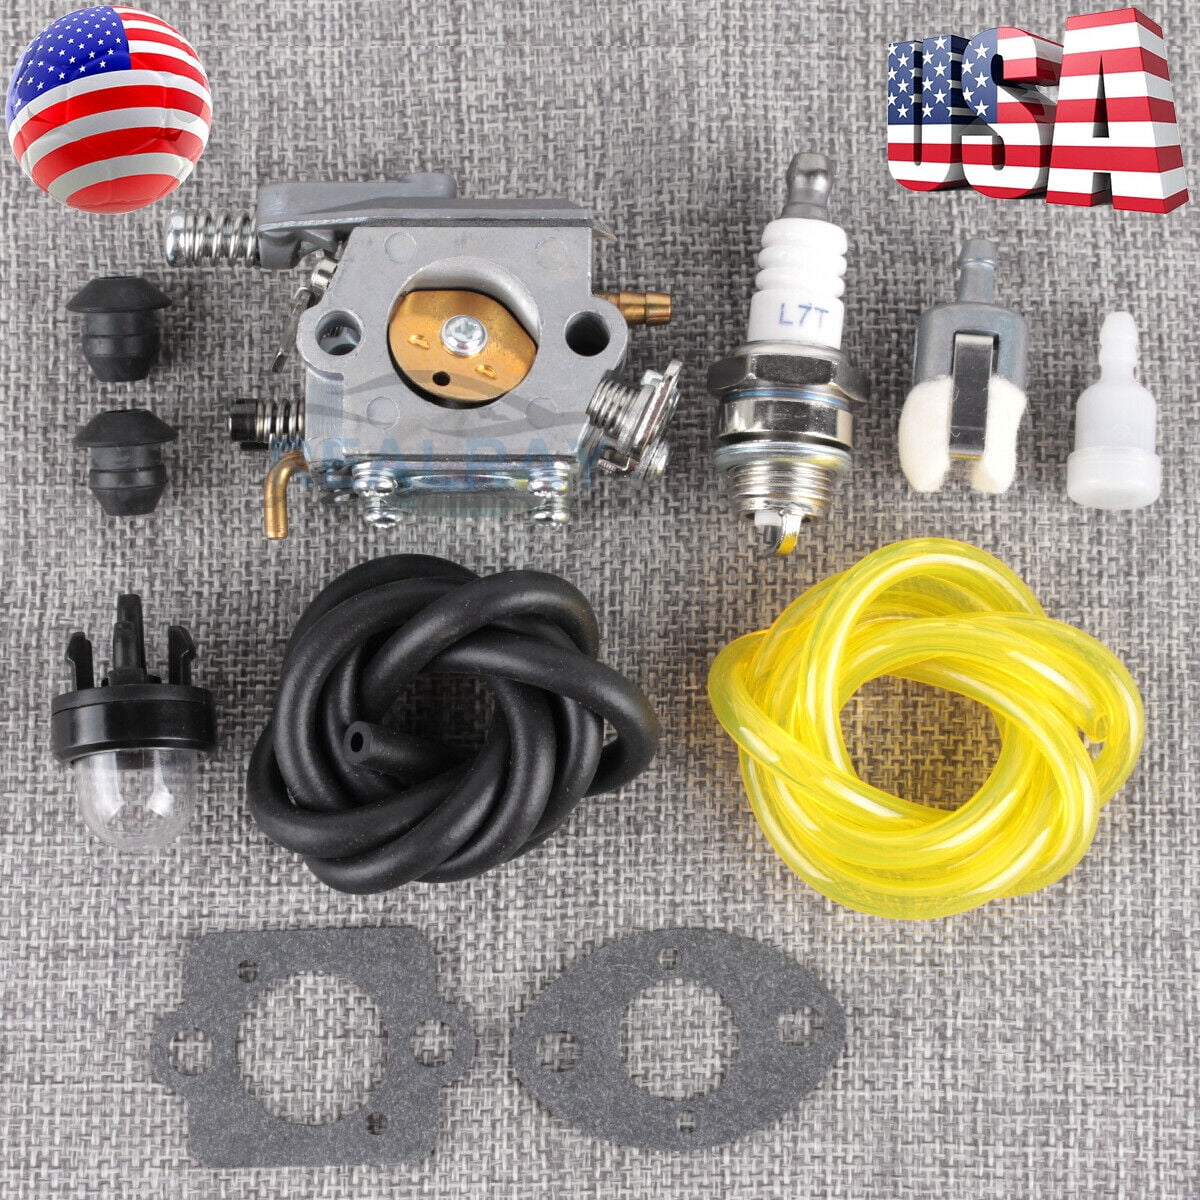 Bopfimer WT-946 Carburetor Tune-Up Kit Replaces A021001700 for CS-310 Chainsaws